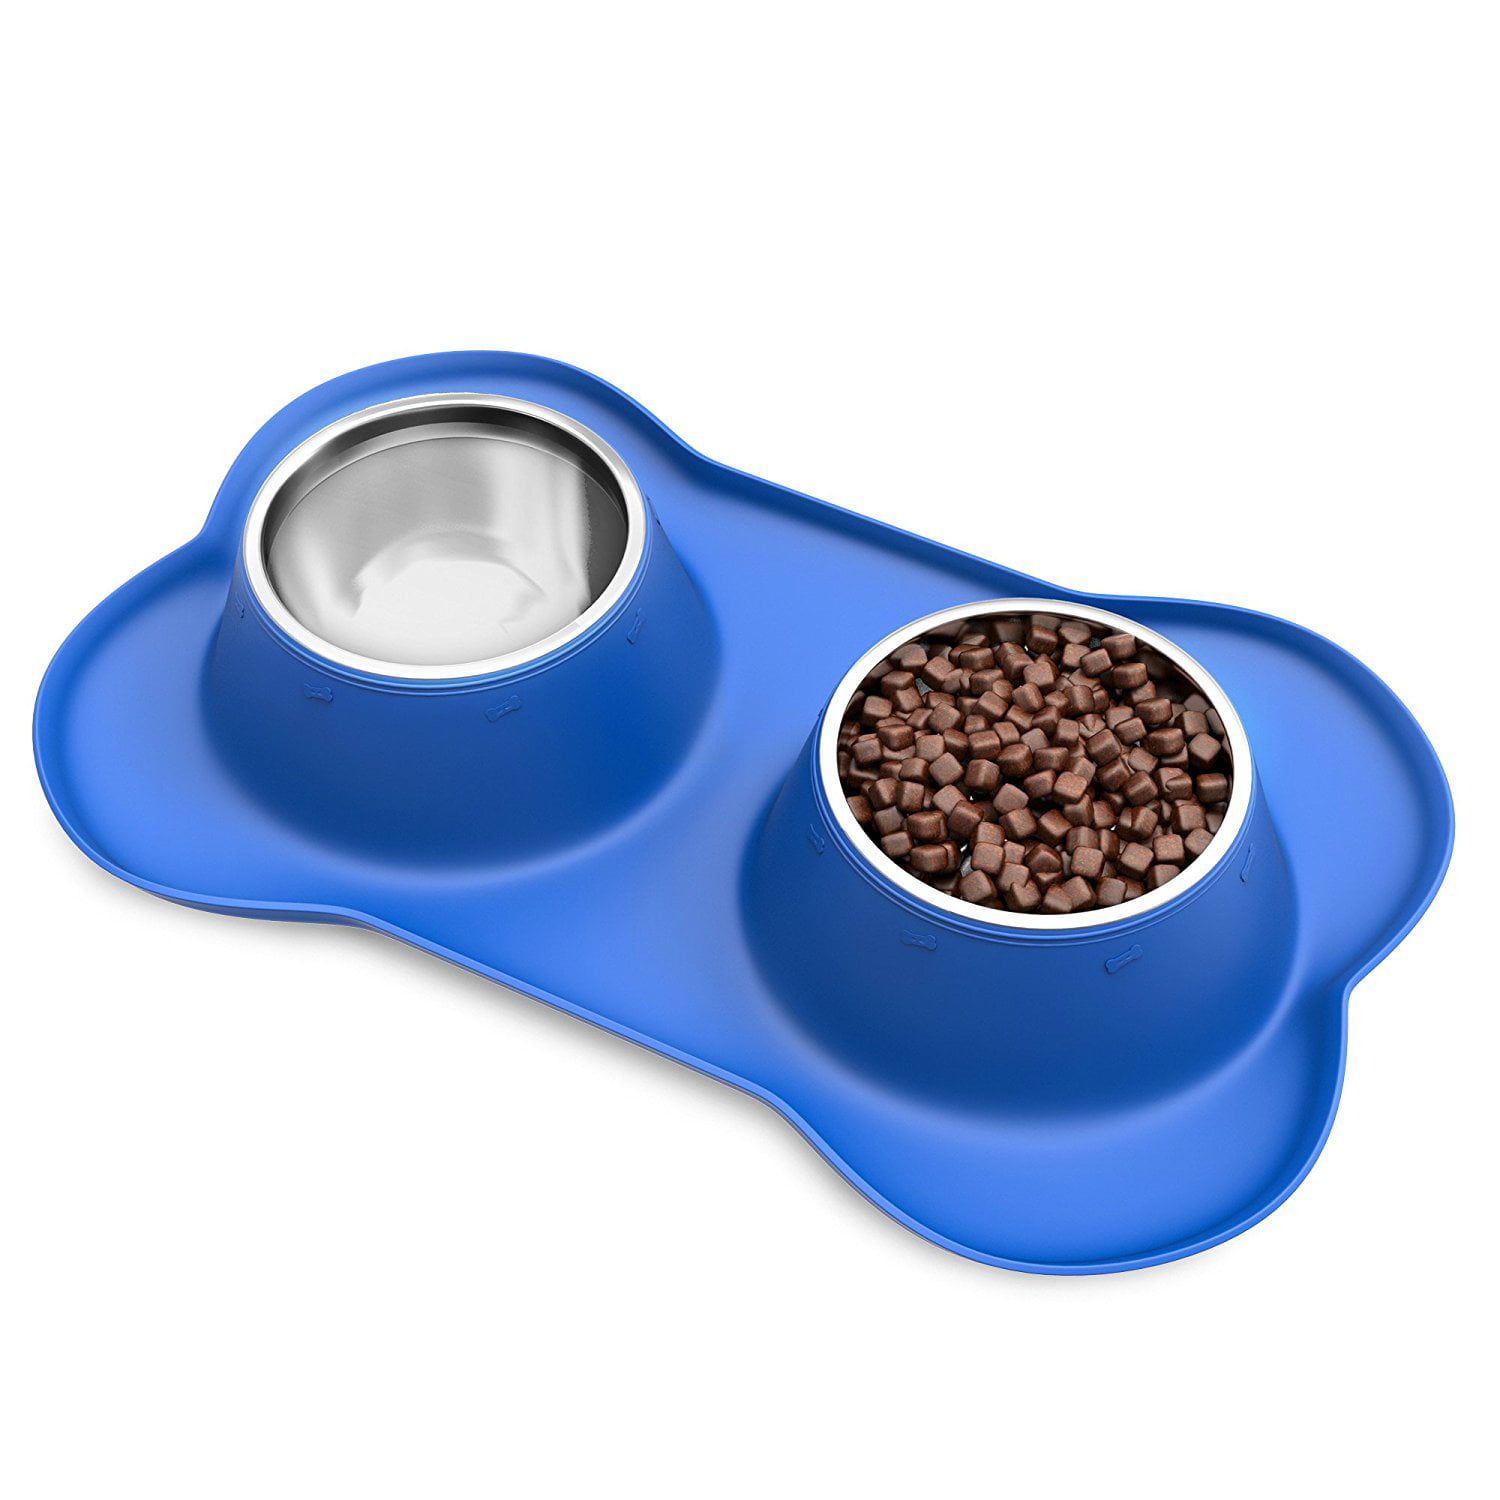 Stainless Steel Pet Bowls for Dogs and Cats Set of 2 Dishes for Food and Water in Non Slip No